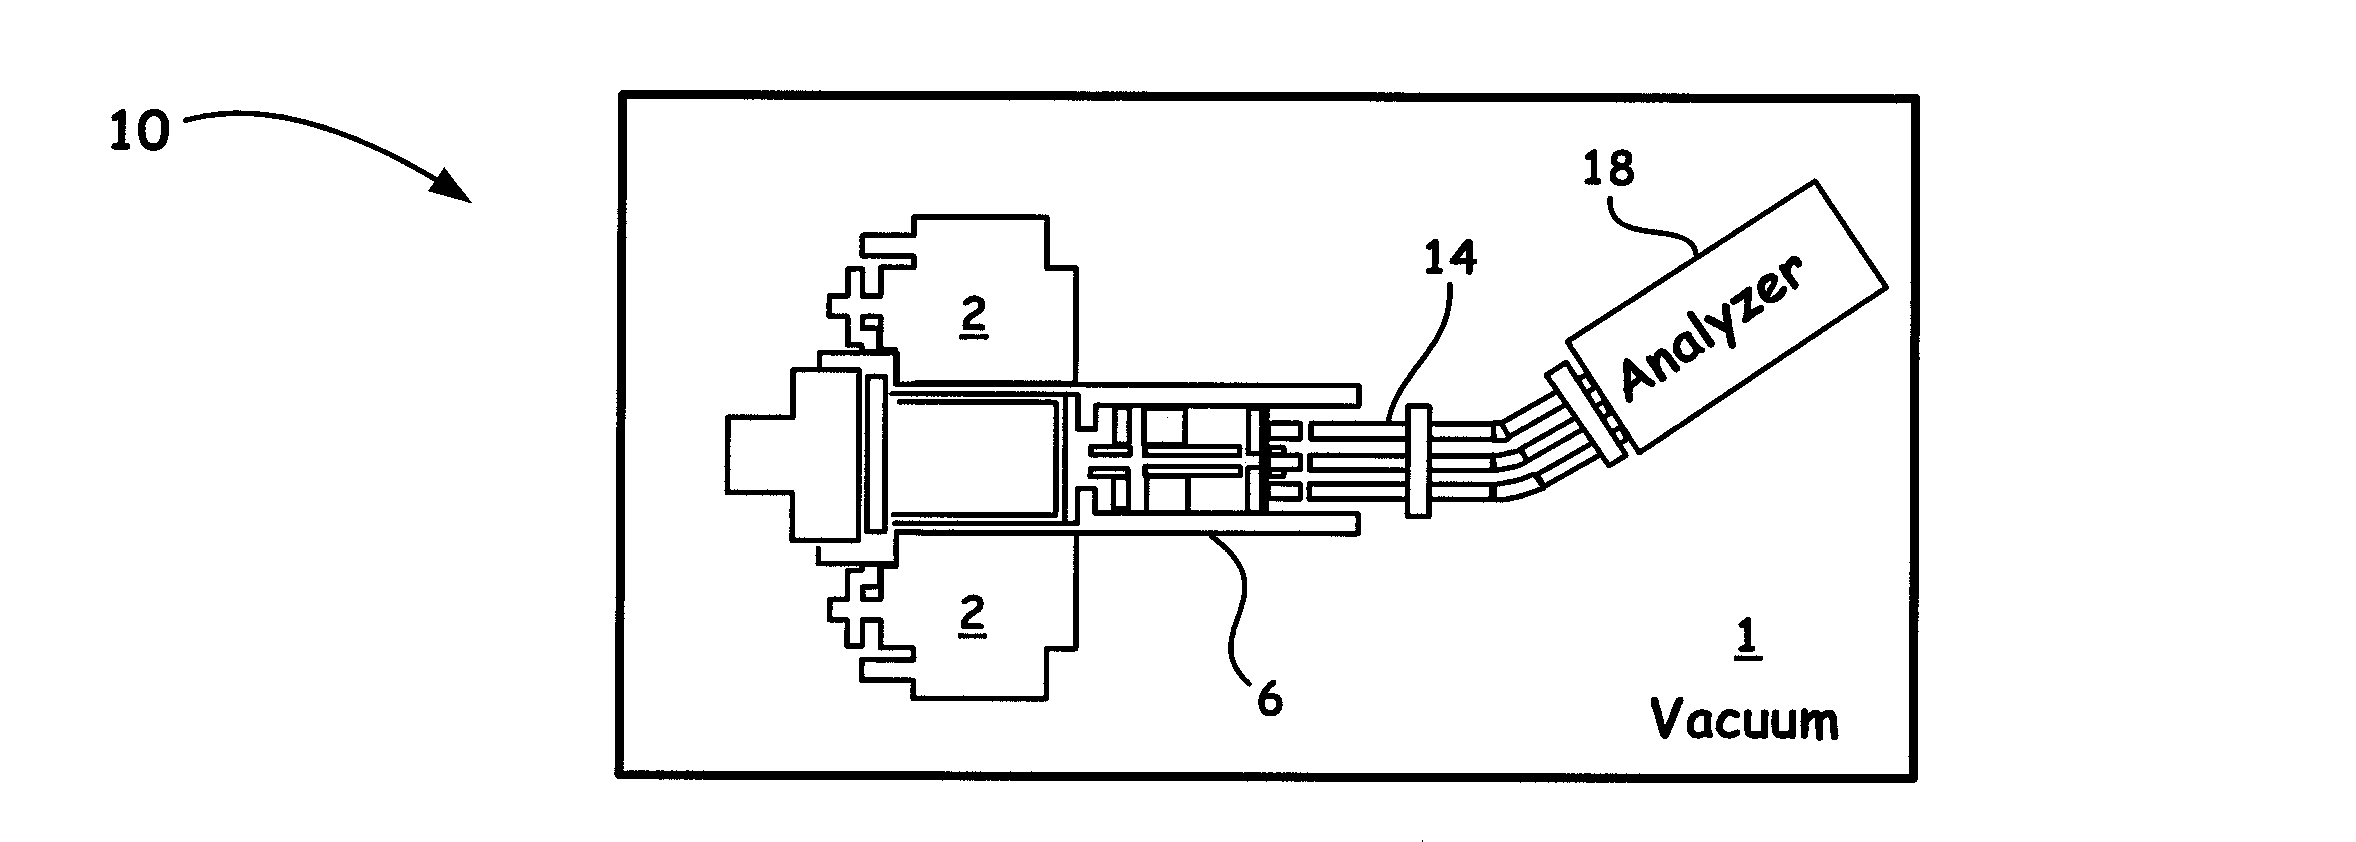 Removable Ion Source that does not Require Venting of the Vacuum Chamber